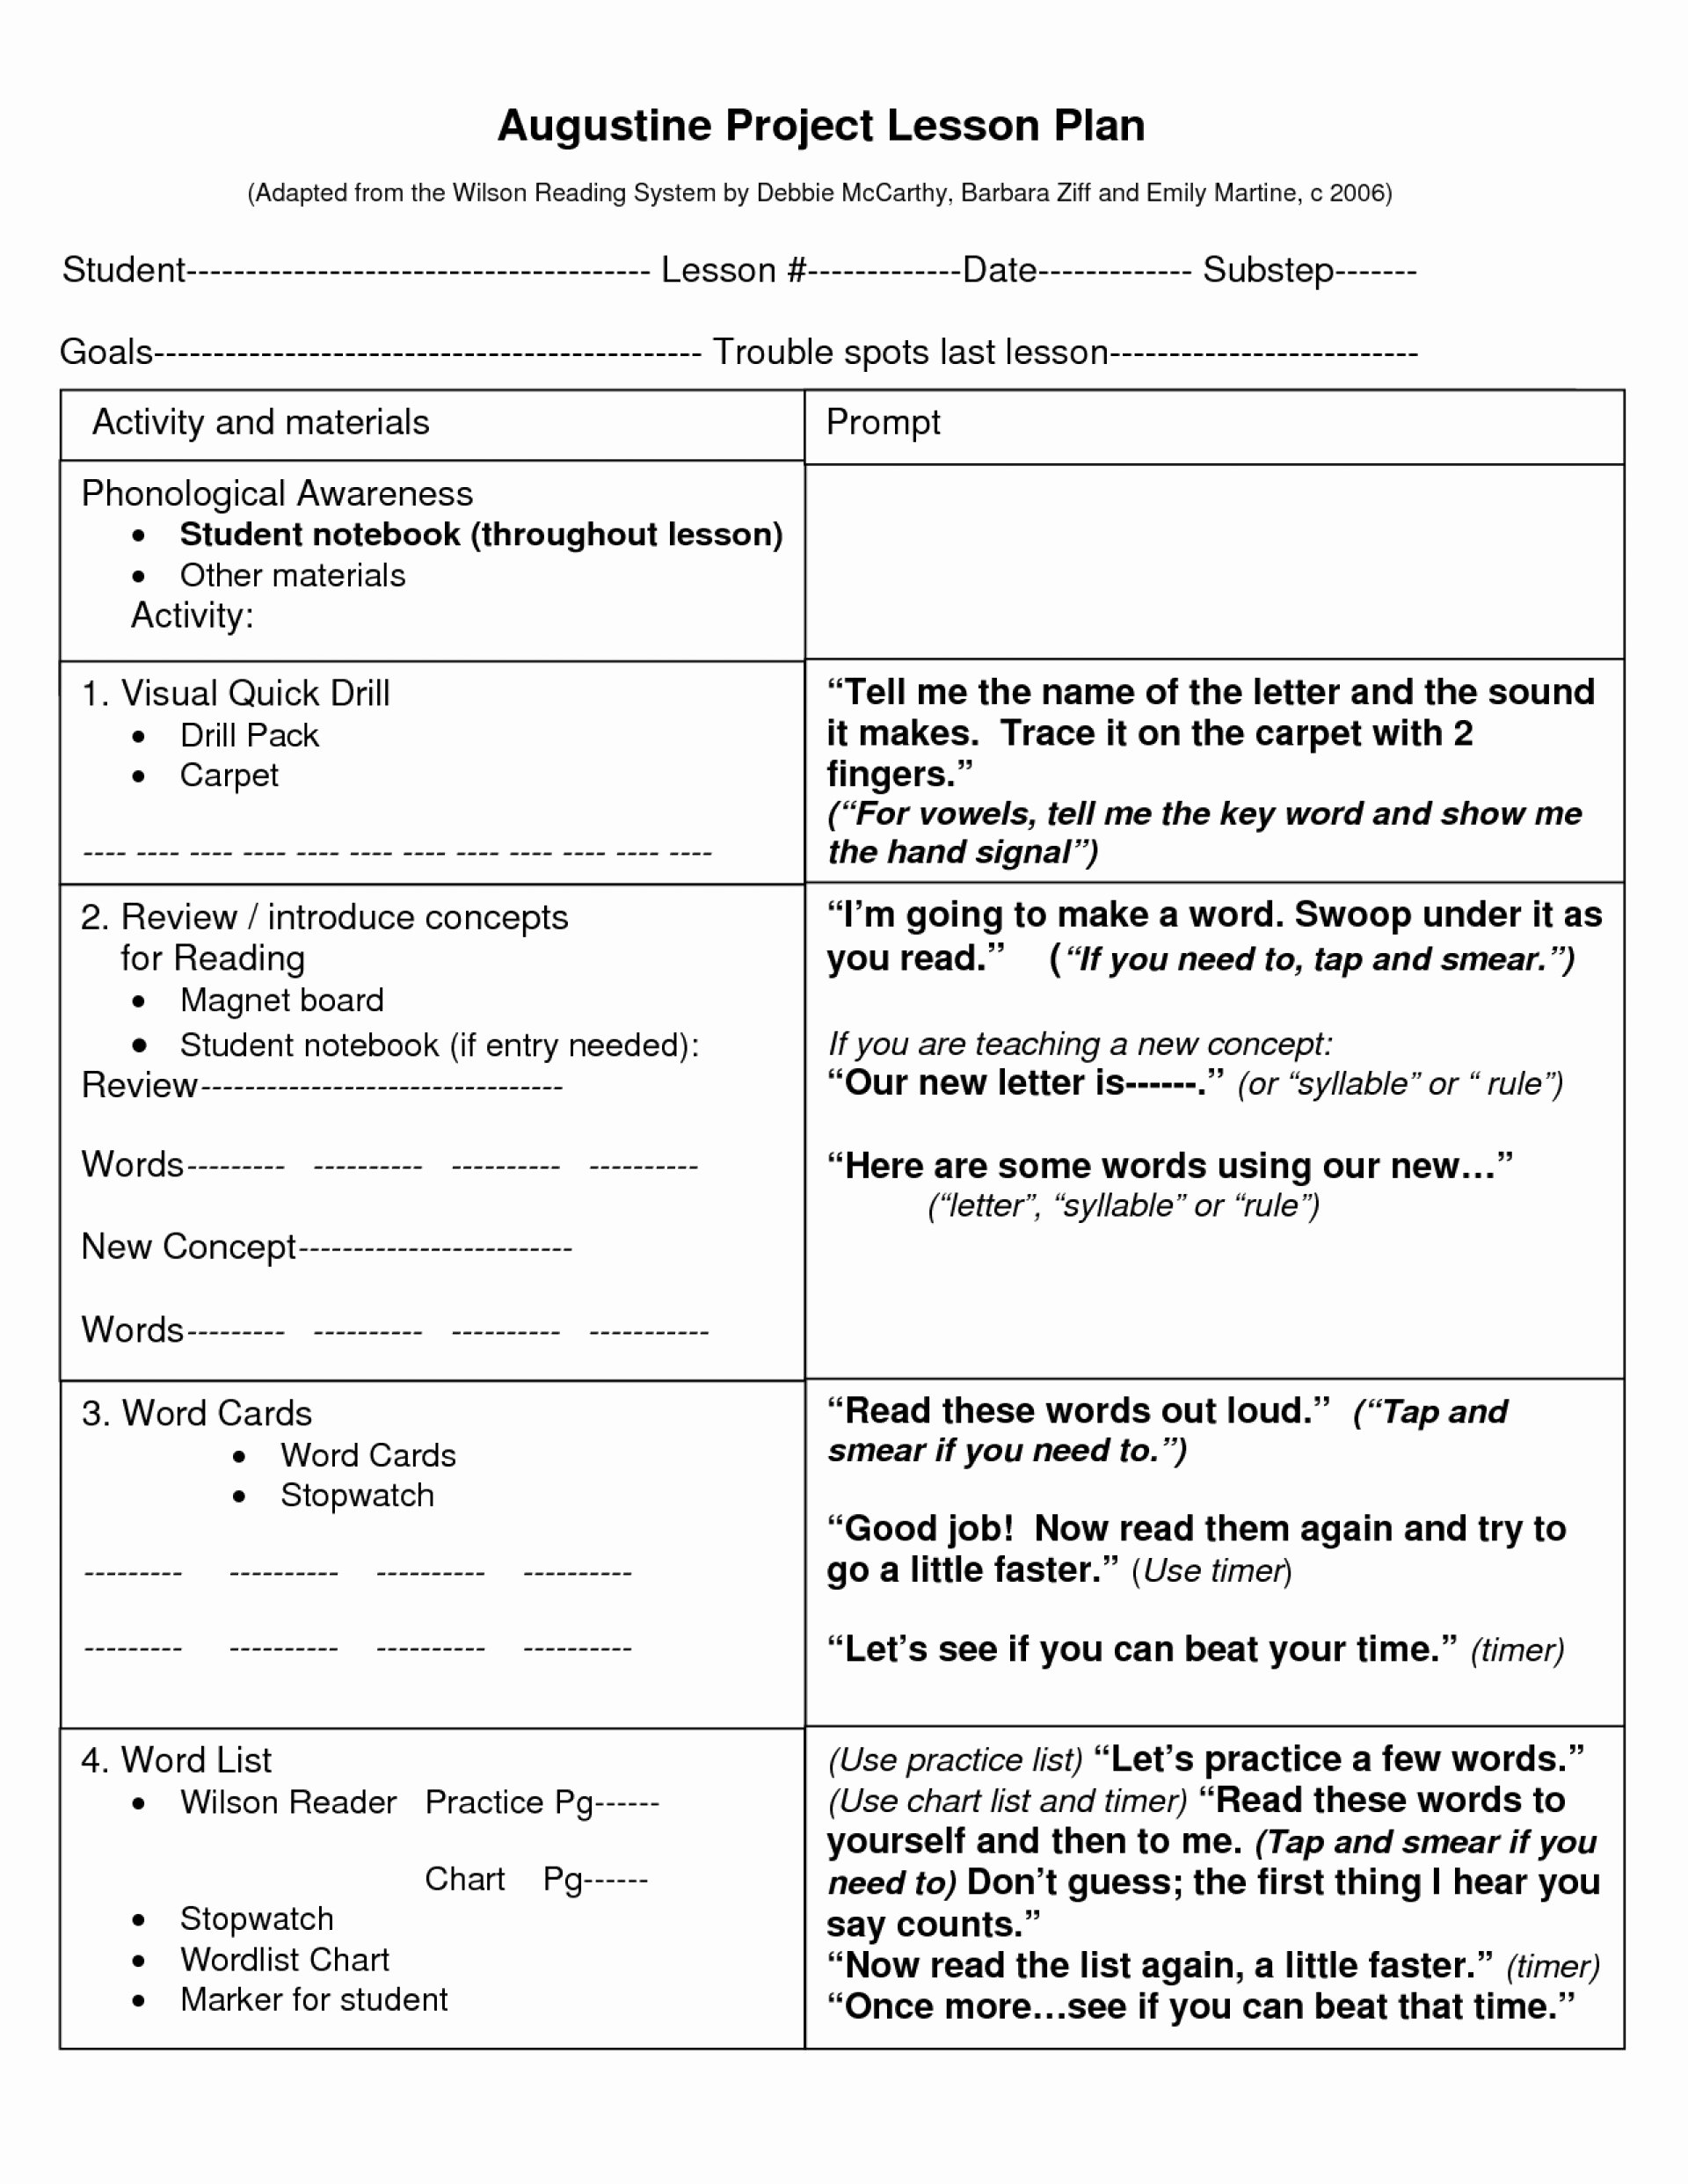 Fundations Lesson Plan Template Unique Fearsome Wilson Lesson Plan Template Tinypetition